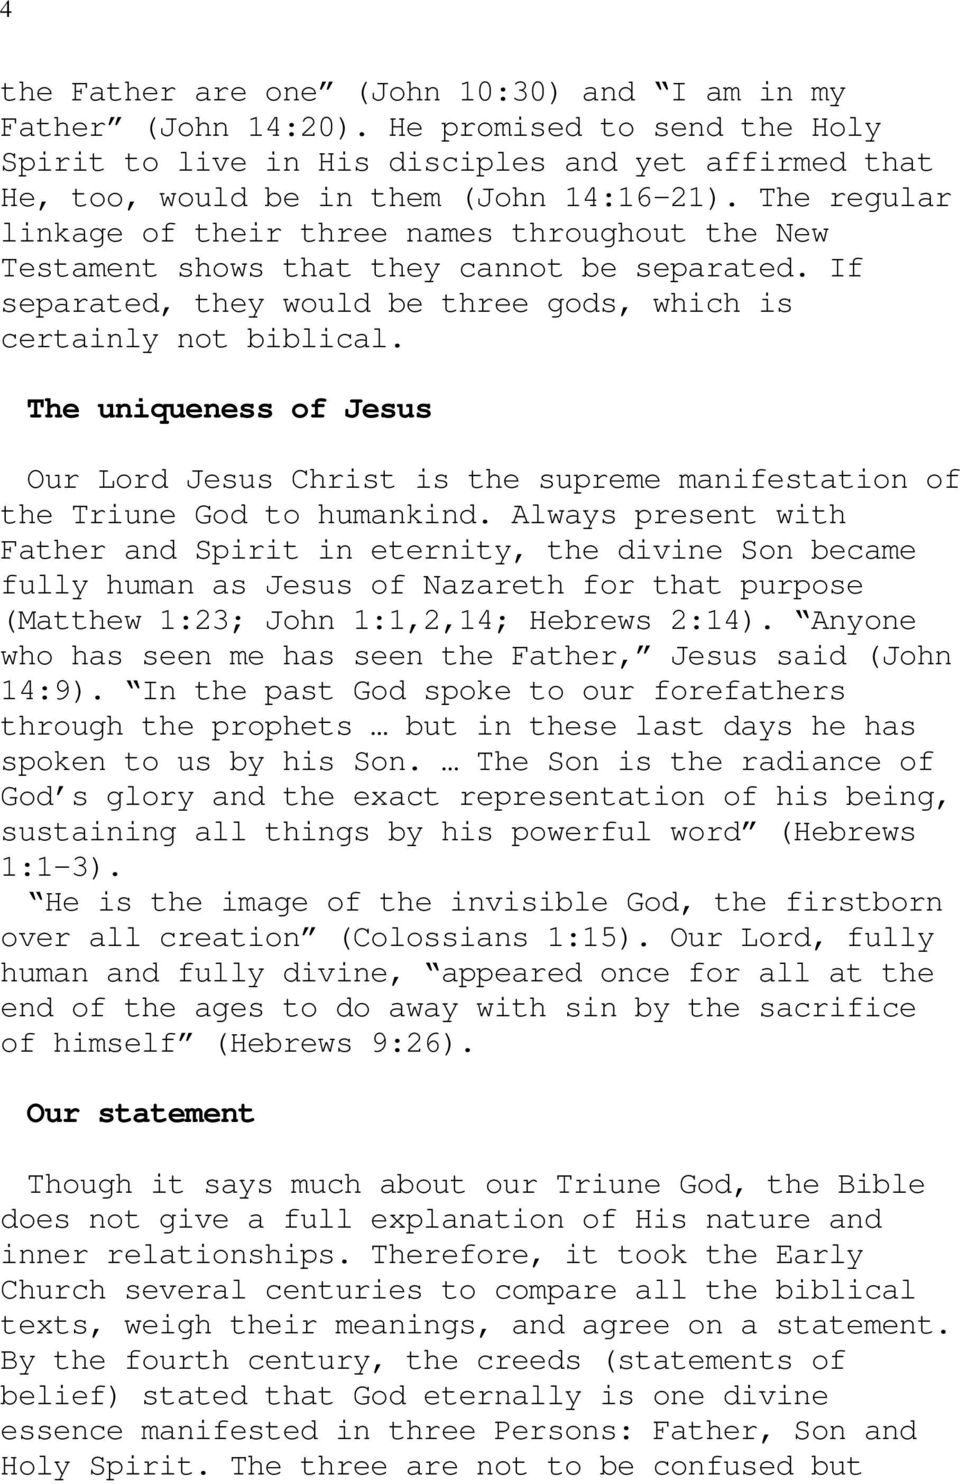 The uniqueness of Jesus Our Lord Jesus Christ is the supreme manifestation of the Triune God to humankind.